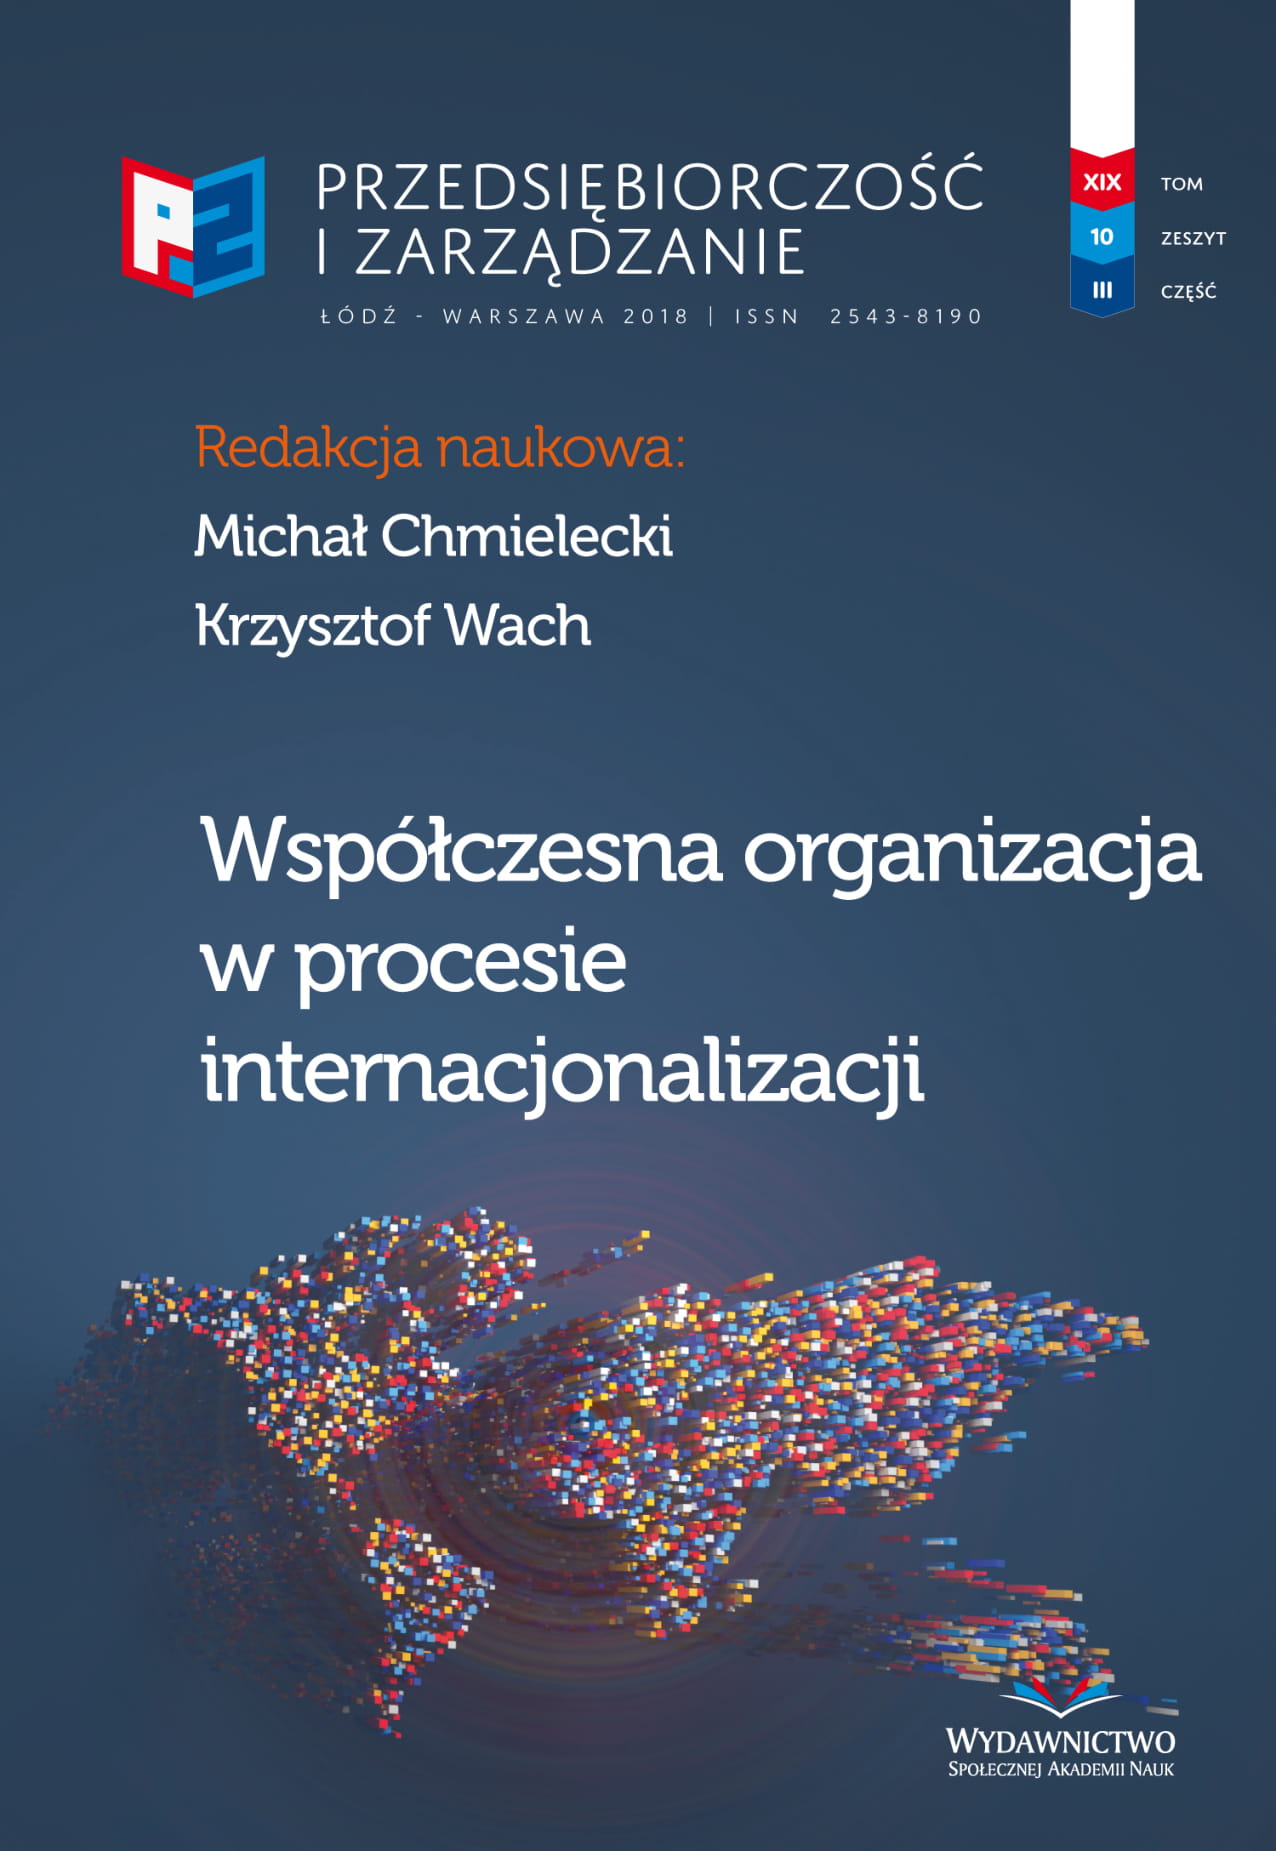 Intercultural Management as an Important Element
of International Human Resource Management Cover Image